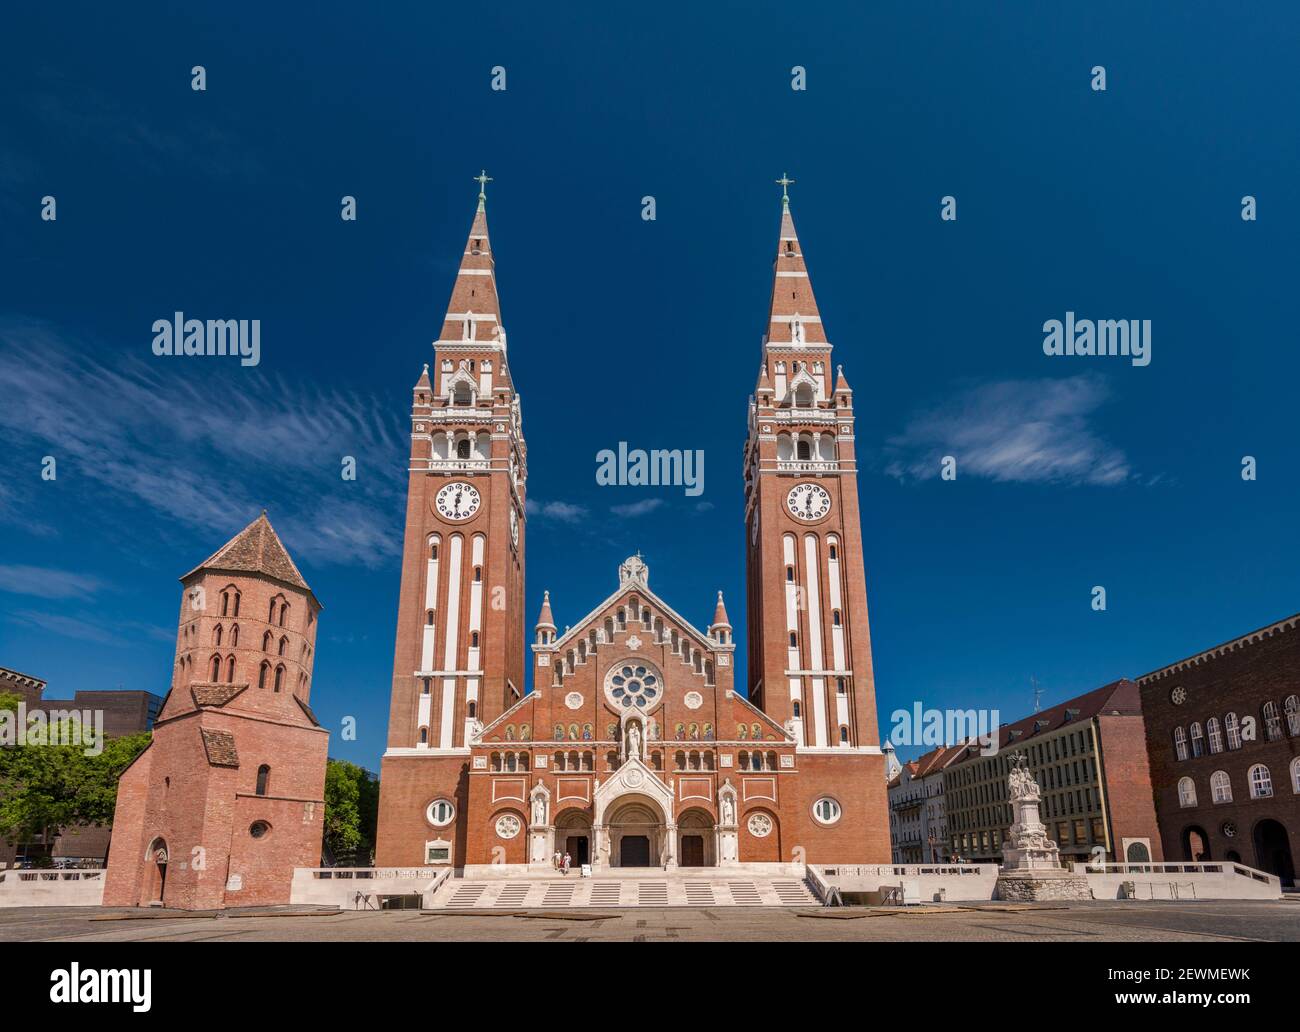 Cathedral, 1930, neo-Romanesque style, Saint Demetrius Tower, 12th century, Romanesque style, in Szeged, Southern Great Plain Region, Hungary Stock Photo